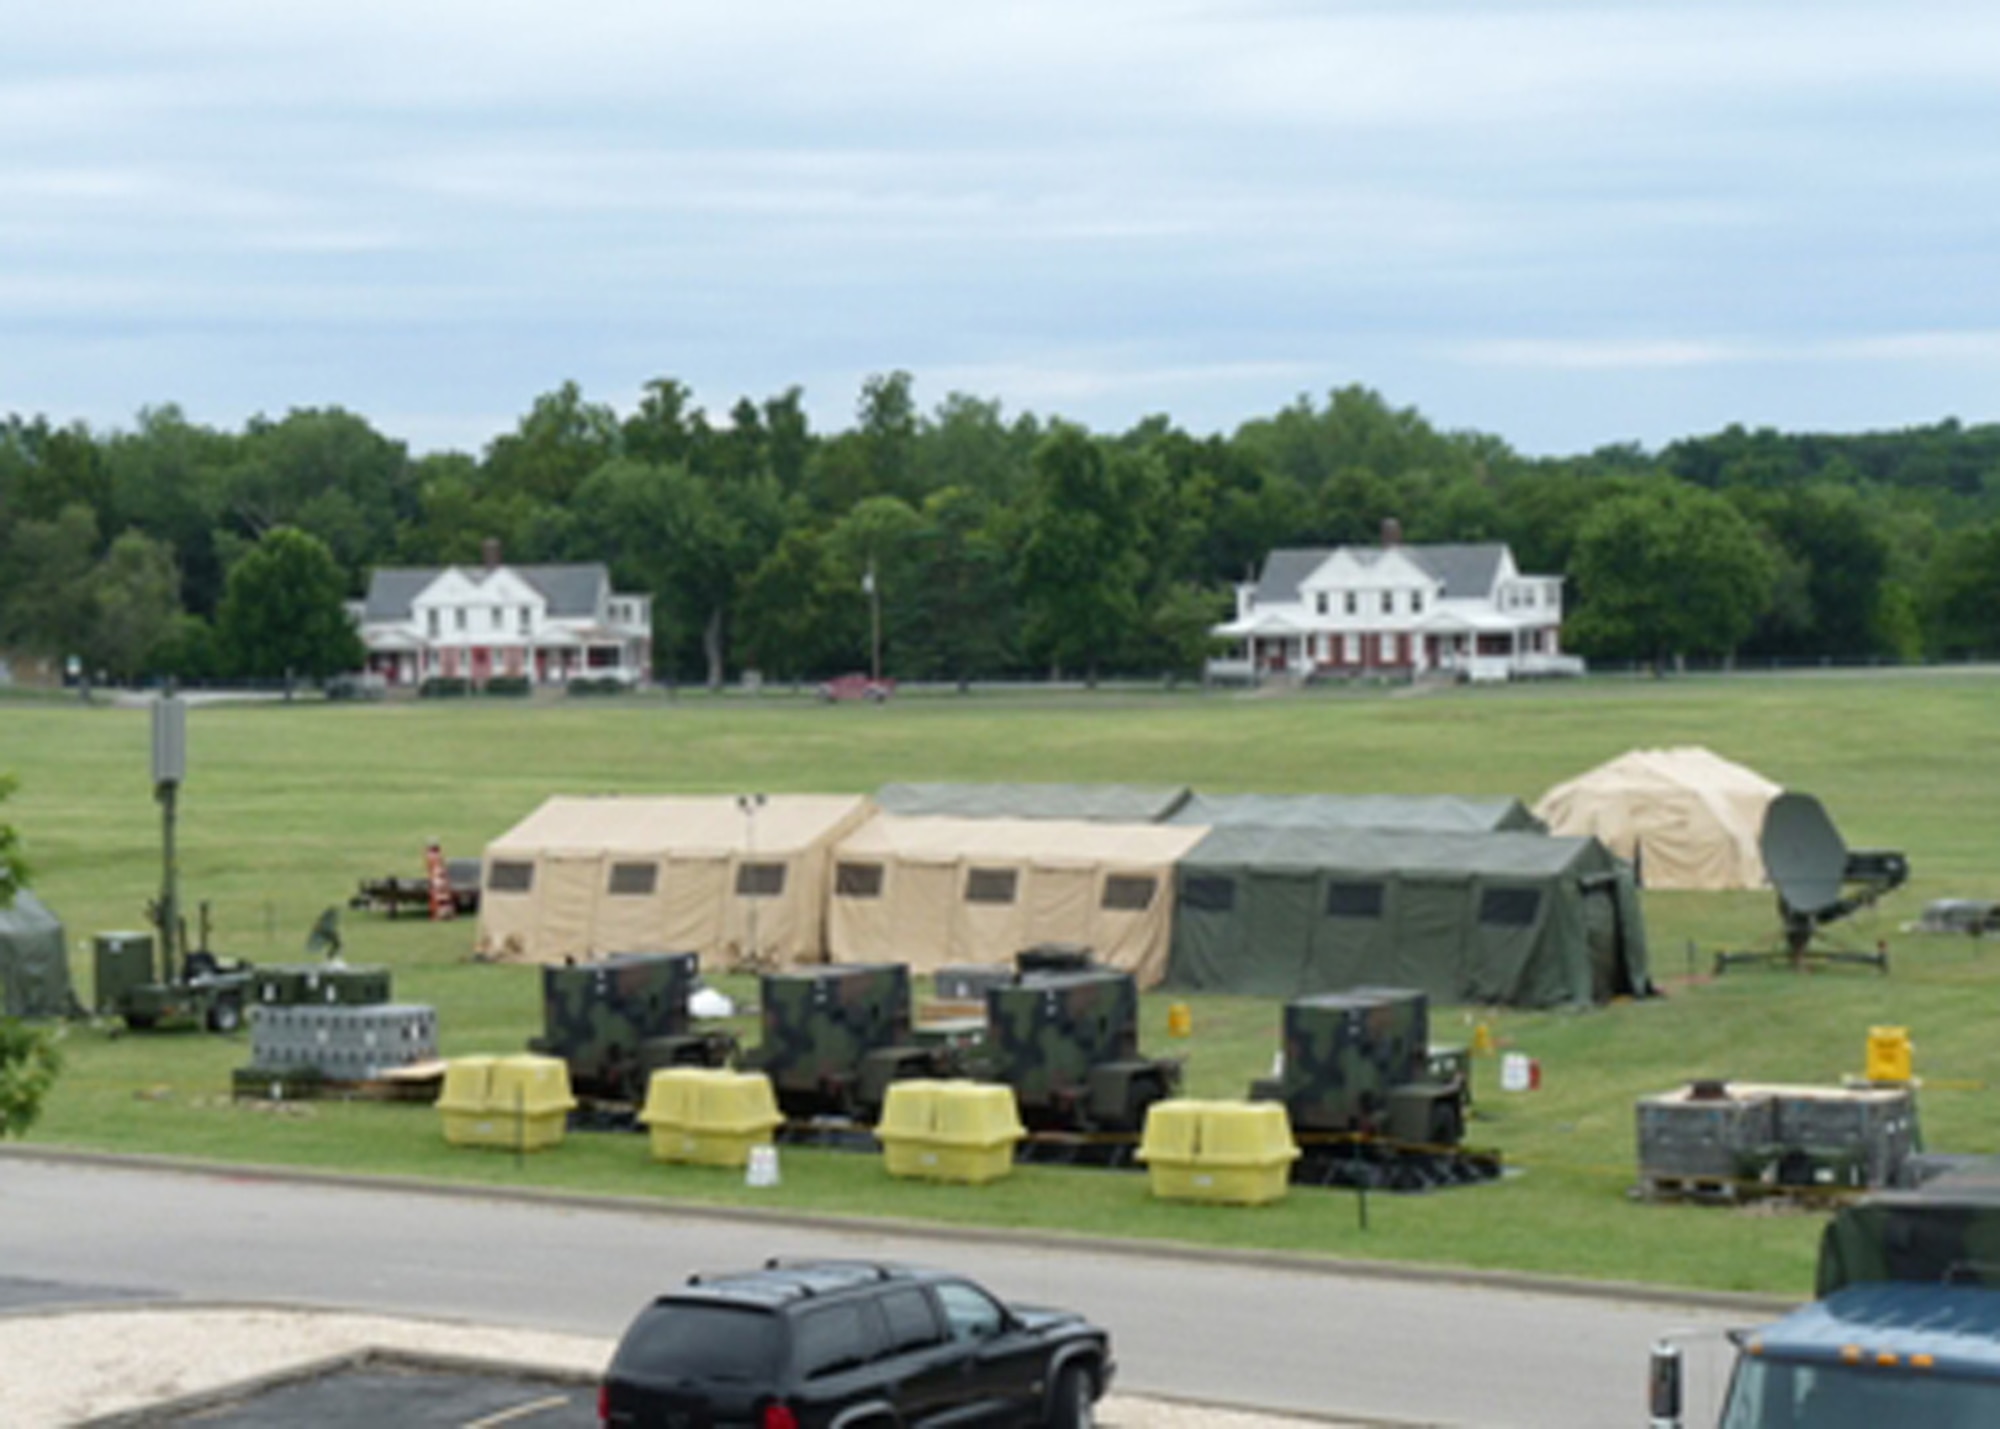 As part of the their annual training exercises, Airmen of the 239th Combat Communications Squadron, Missouri Air National Guard, erected this high-tech field communications station at Jefferson Barracks in under seven hours. (Photo by Bill Phelan) 